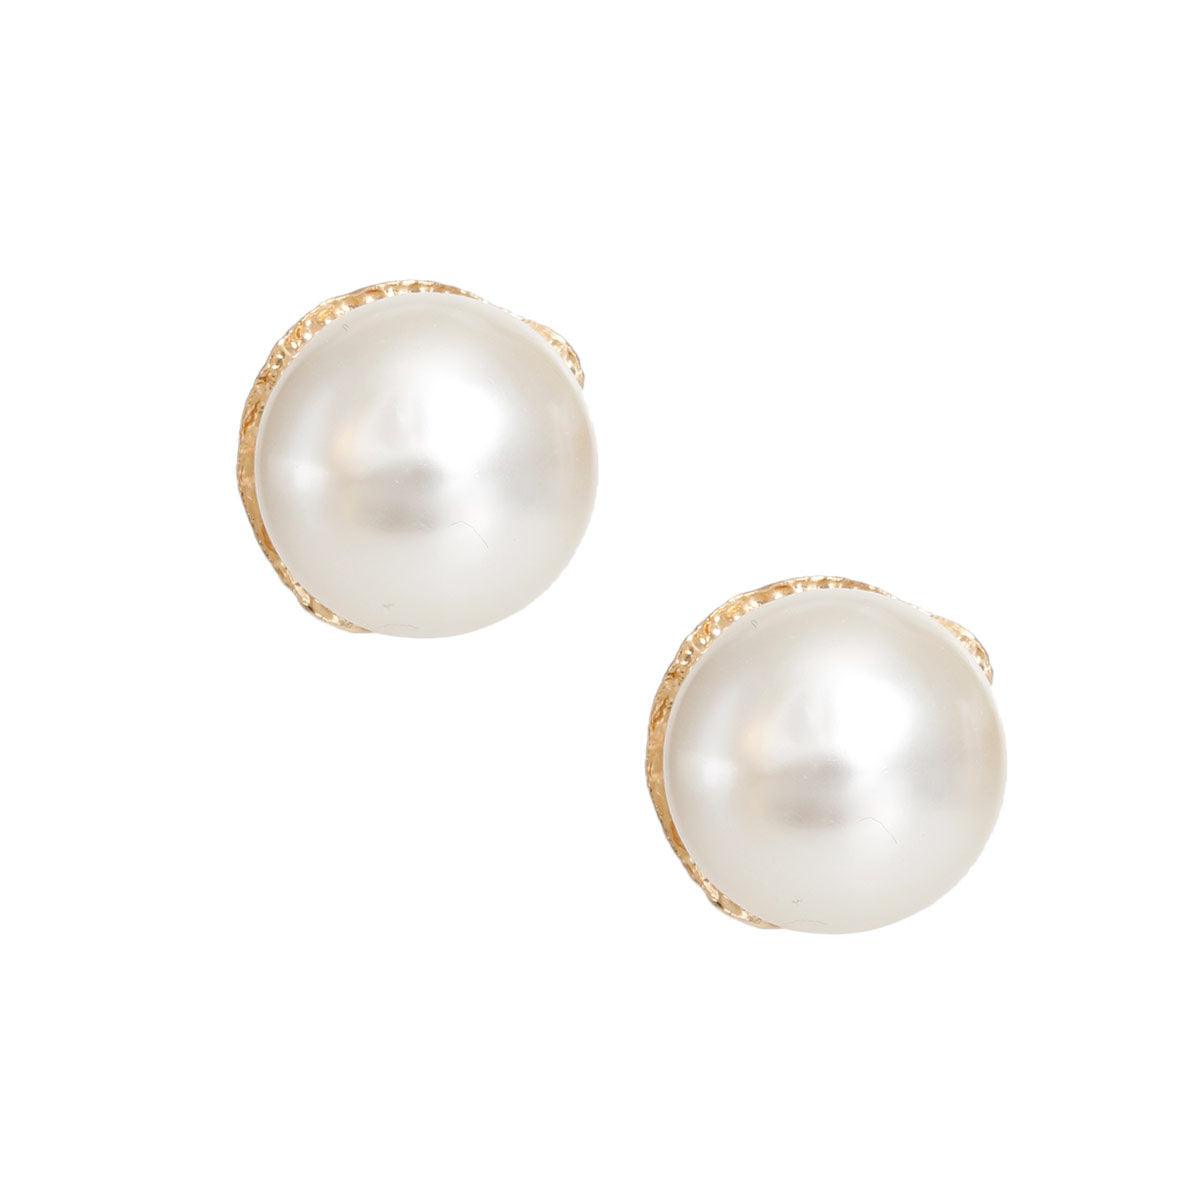 Cream Bauble Pearl Stud Earrings versatile, Turn heads with a bold and statement-making look